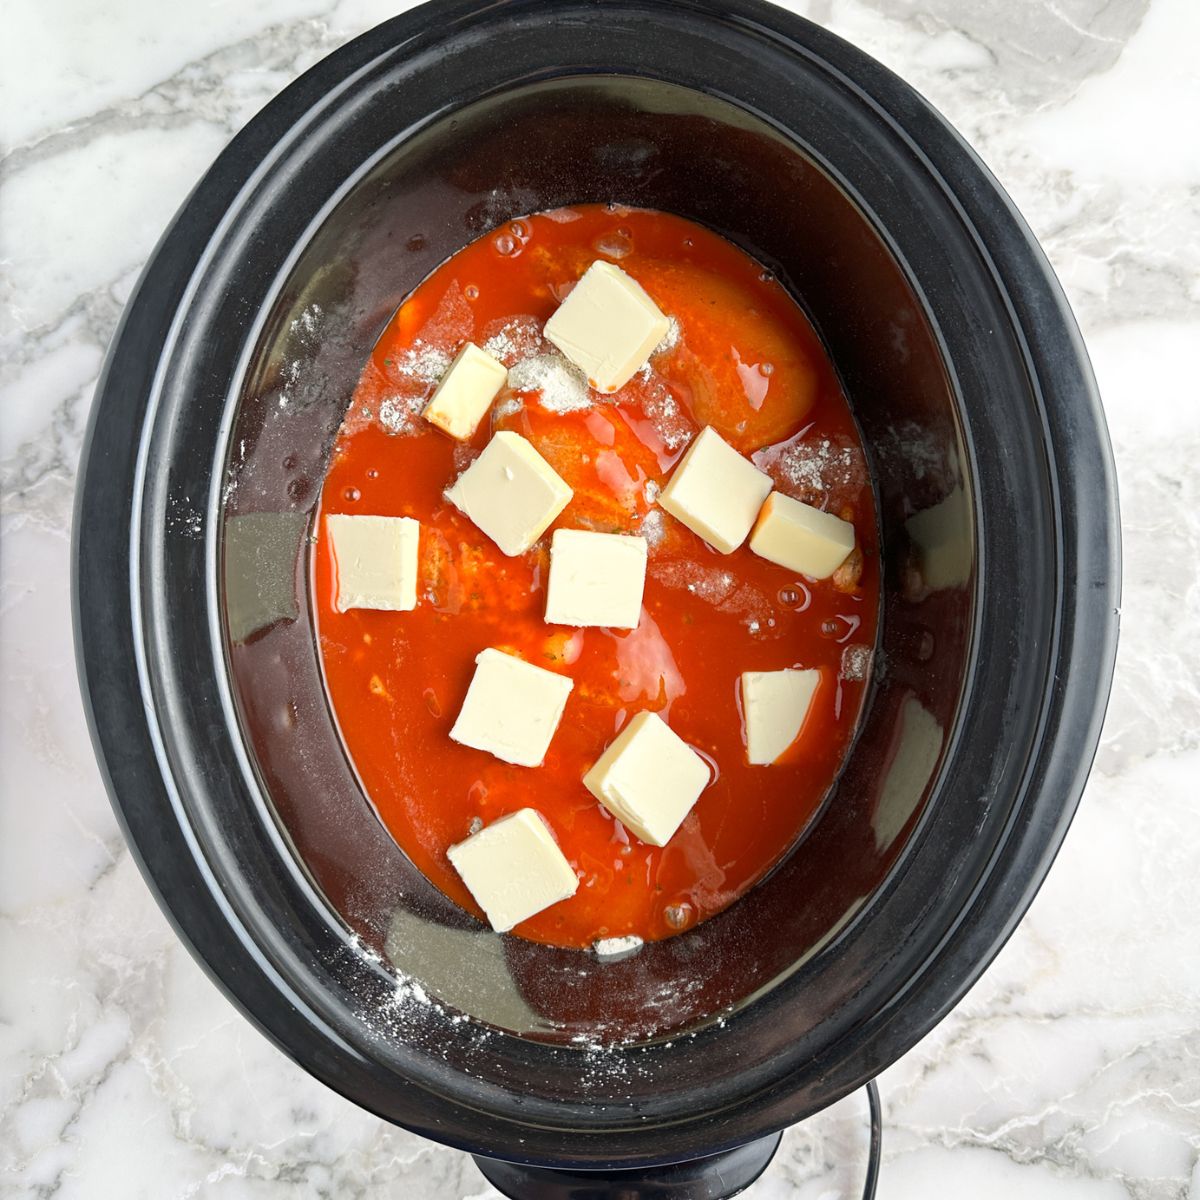 Slow cooker with chicken, hot sauce, and butter.